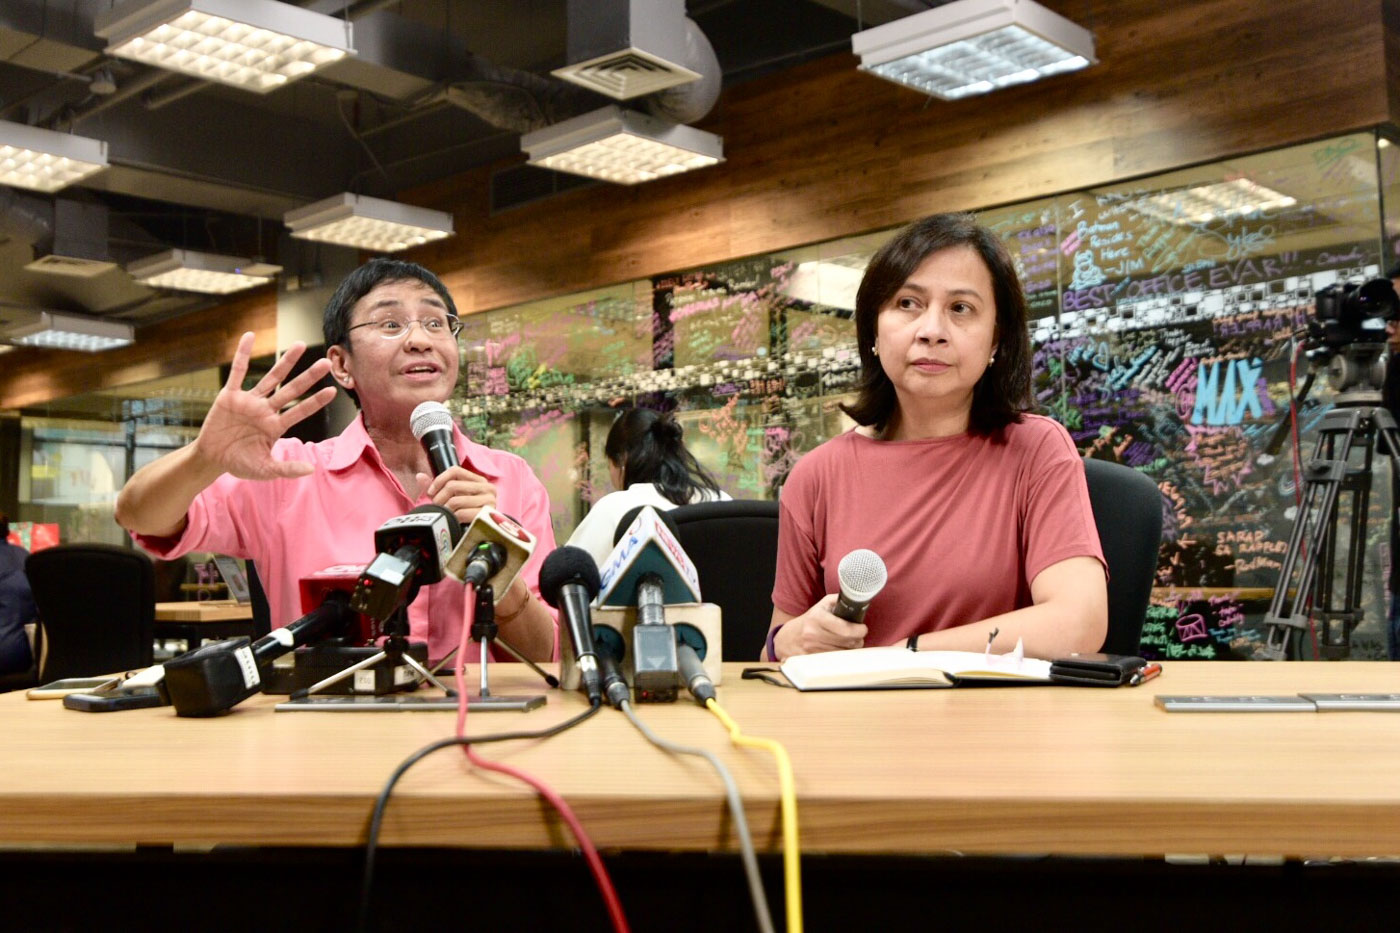 RAPPLER REGISTRATION. Rappler CEO Maria Ressa and acting managing editor Chay Hofileña hold a press conference in the Rappler newsroom on January 15, 2018. Photo by LeAnne Jazul/Rappler 